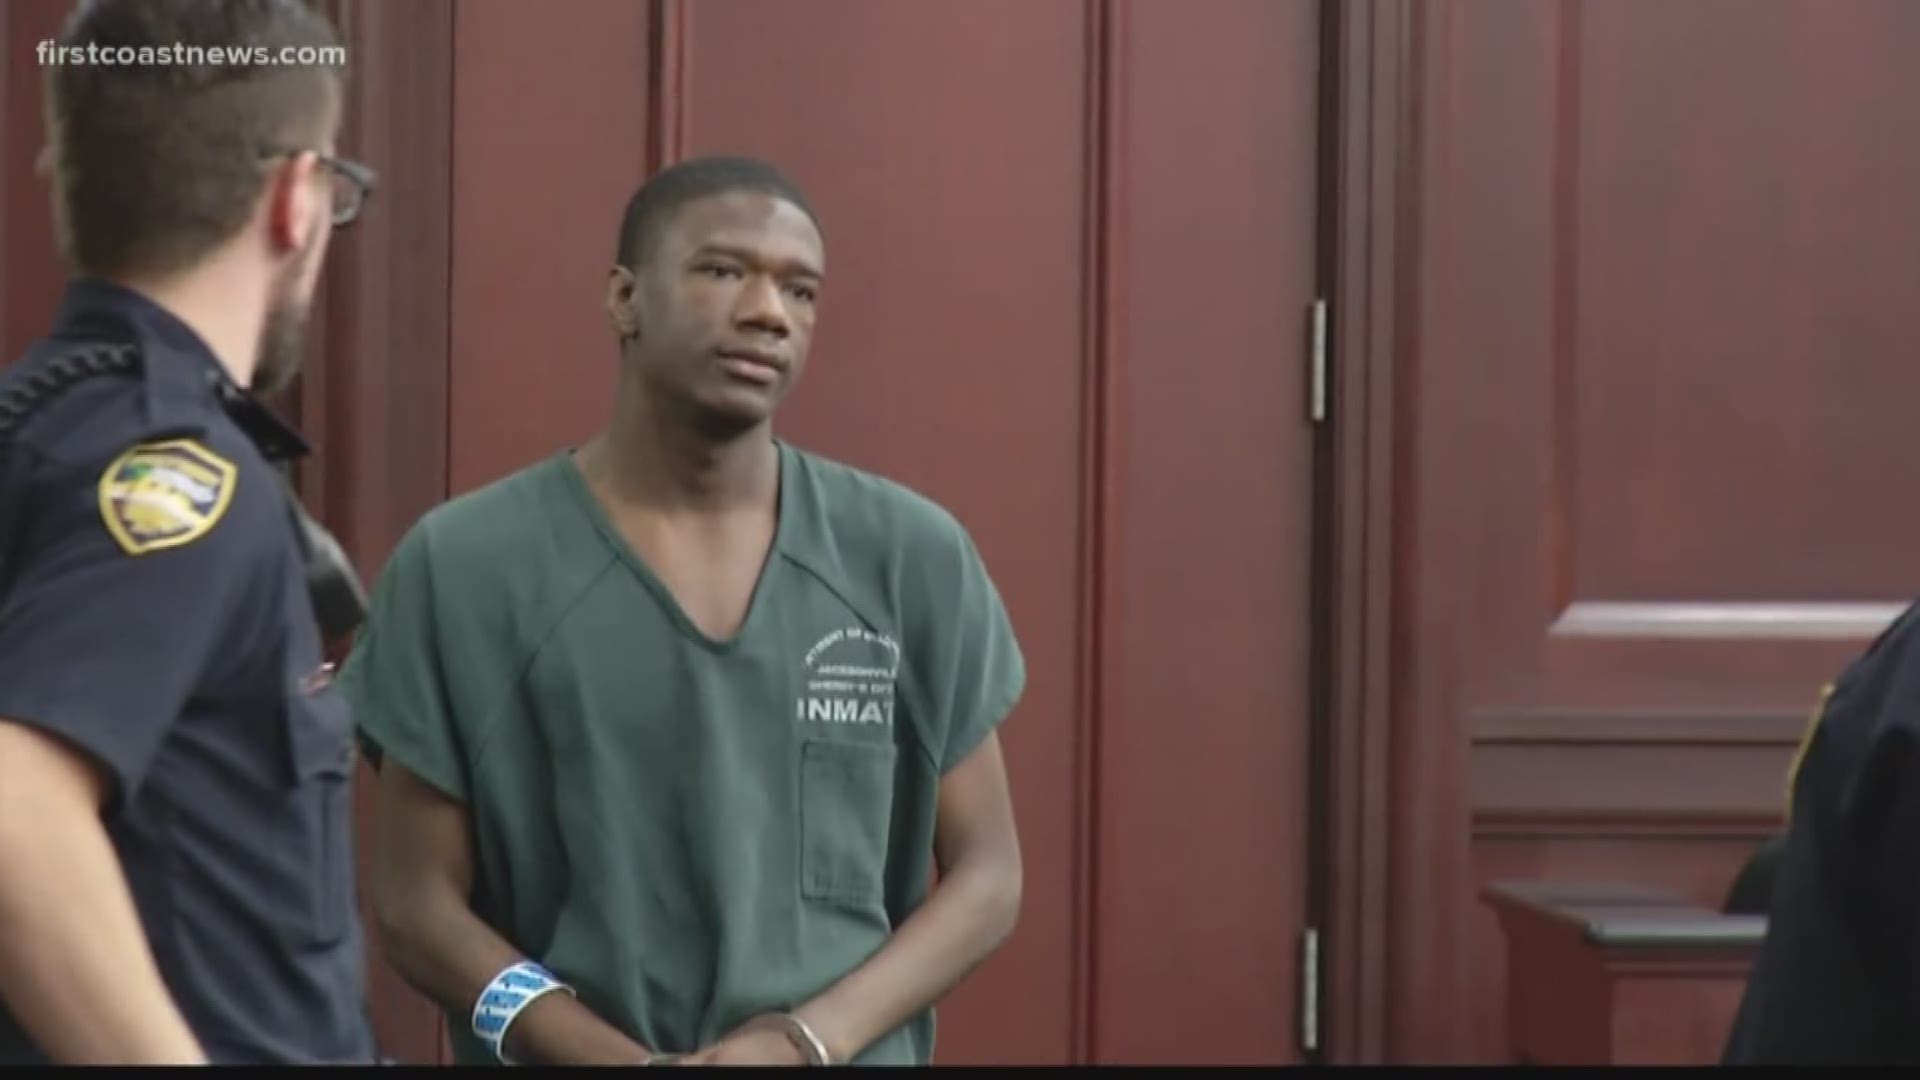 The two teens convicted of killing 22-month-old Aiden McClendon were sentenced to life in prison on Thursday, but will be up for review after 25 years due to Florida's new law.